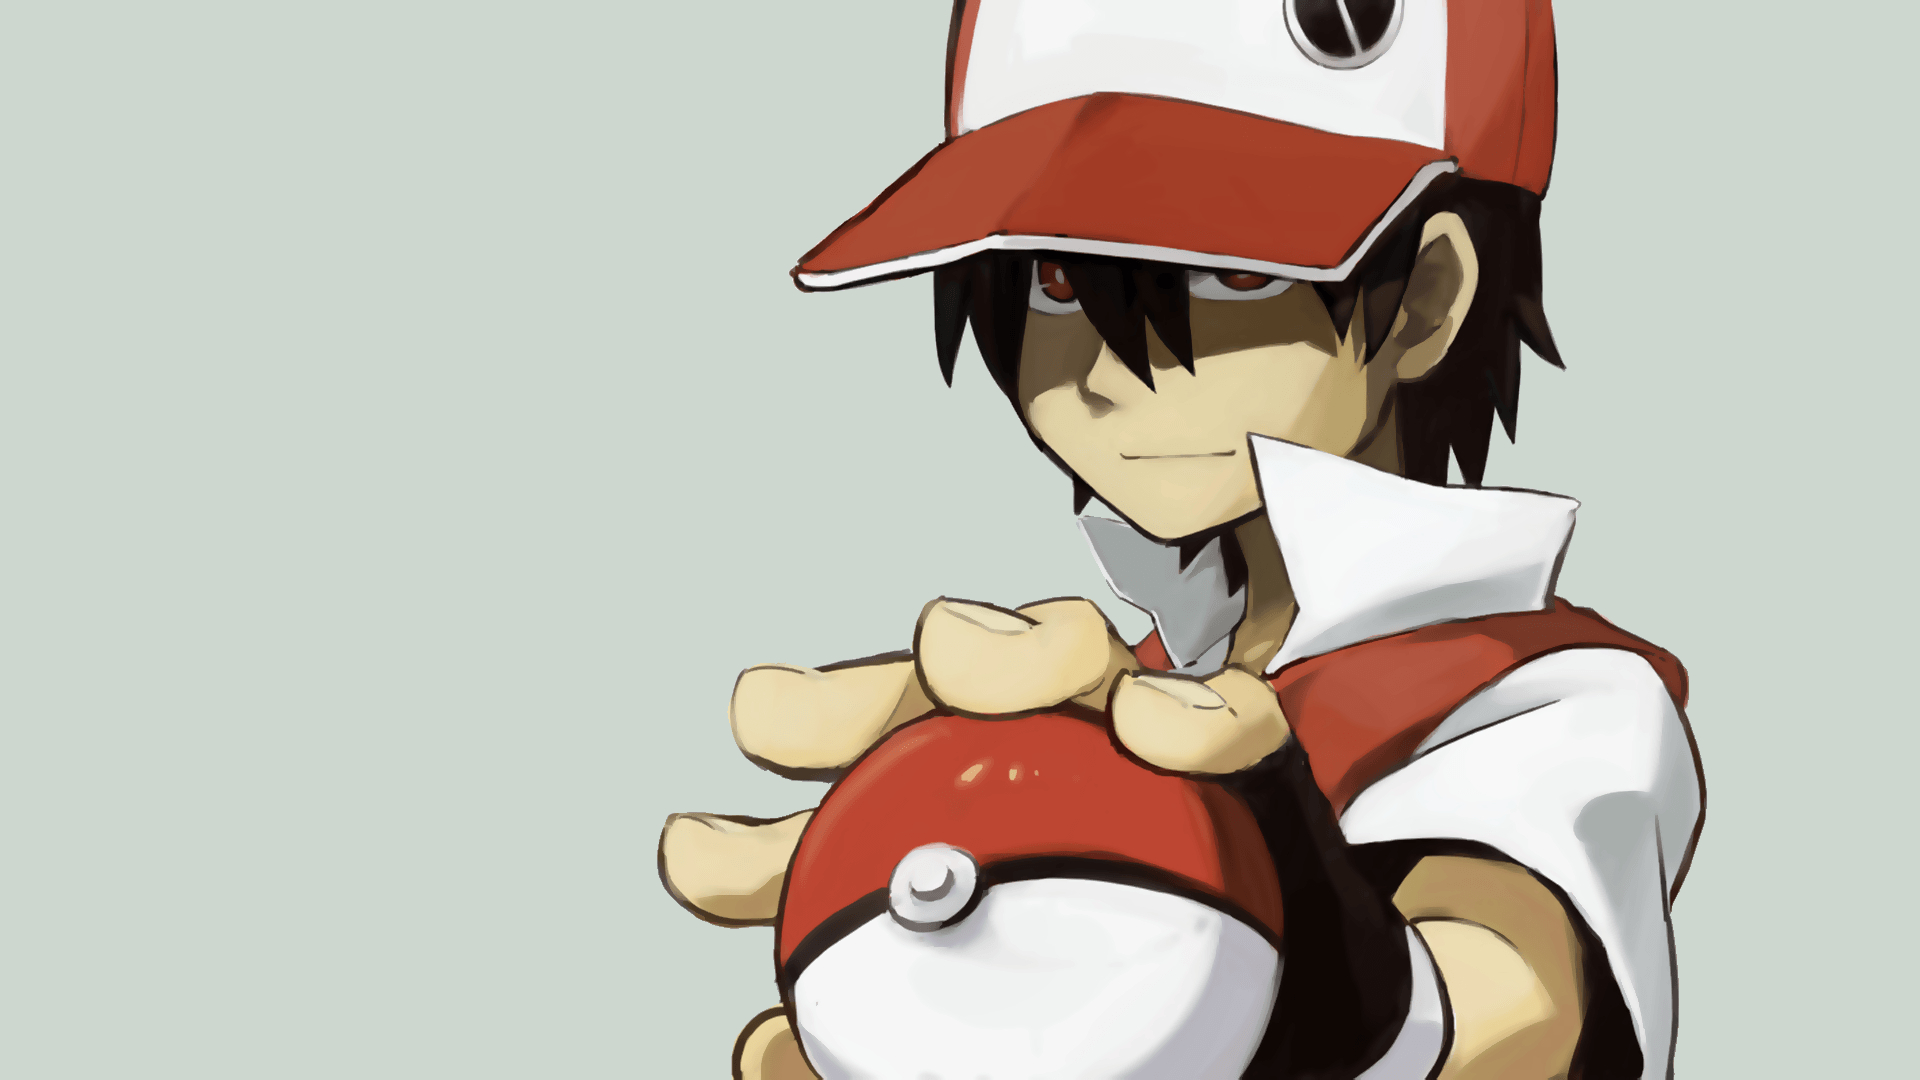 1920x1080 Anime Pokemon Wallpapers Red